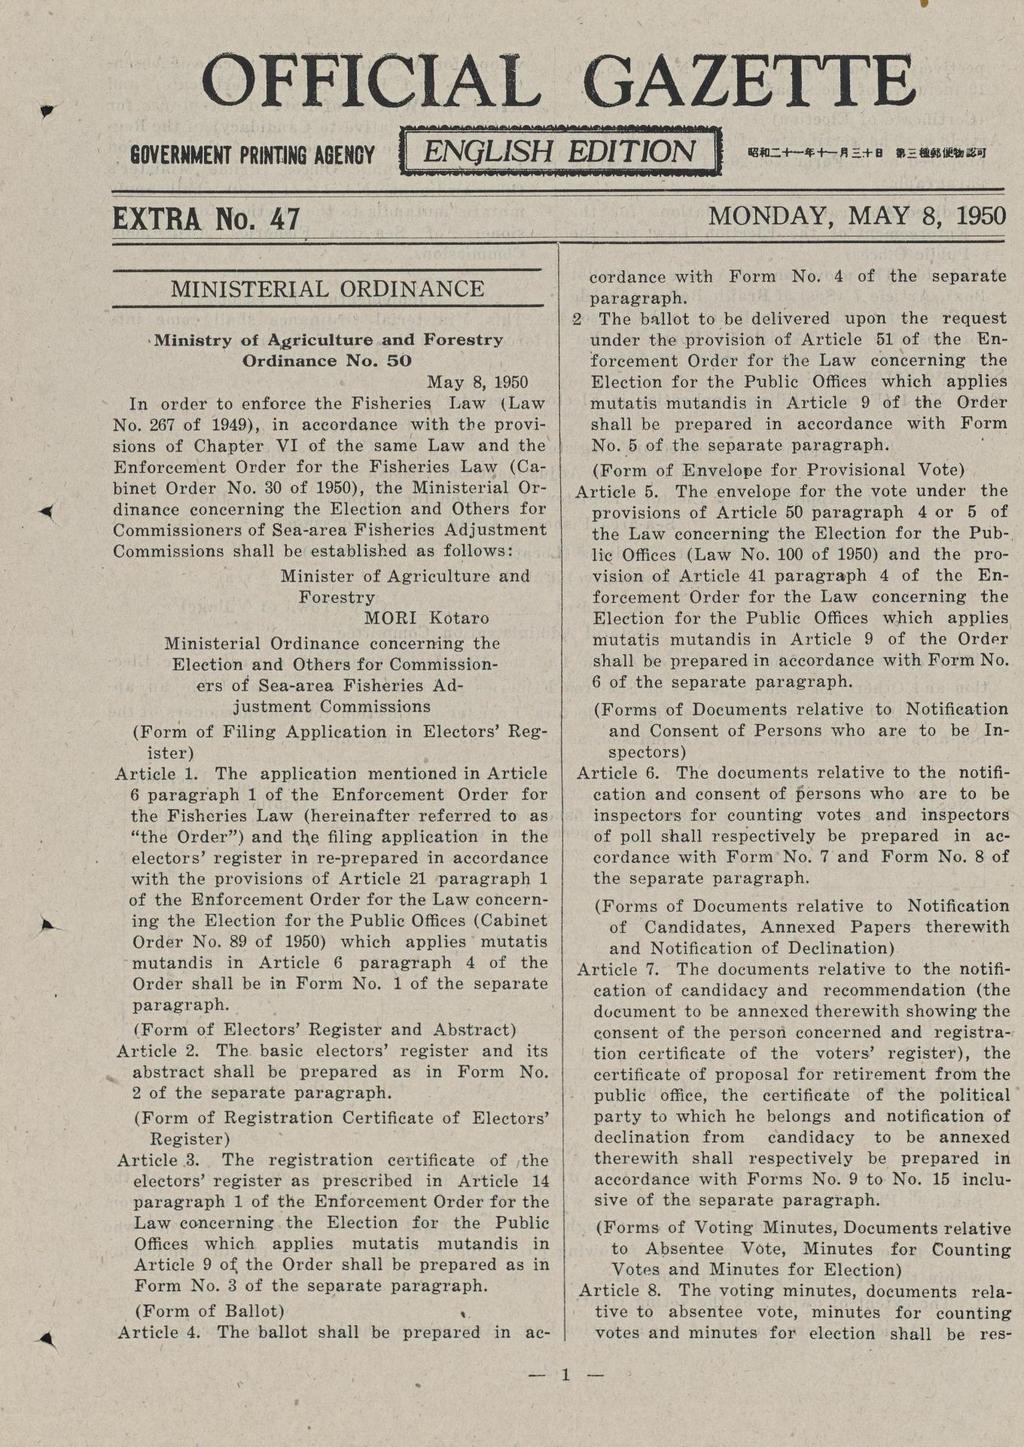 OFFICIAL GAZETTE ENGLISH GOVERNMENT PRINTING AGENCY j EDITIONrj Bgfaz+~*+- =+b *E.m&mvim EXTRA No. 47 MONDAY, MAY 8, 1950 MINISTERIAL ORDINANCE Ministry of Agriculture and Forestry Ordinance No.